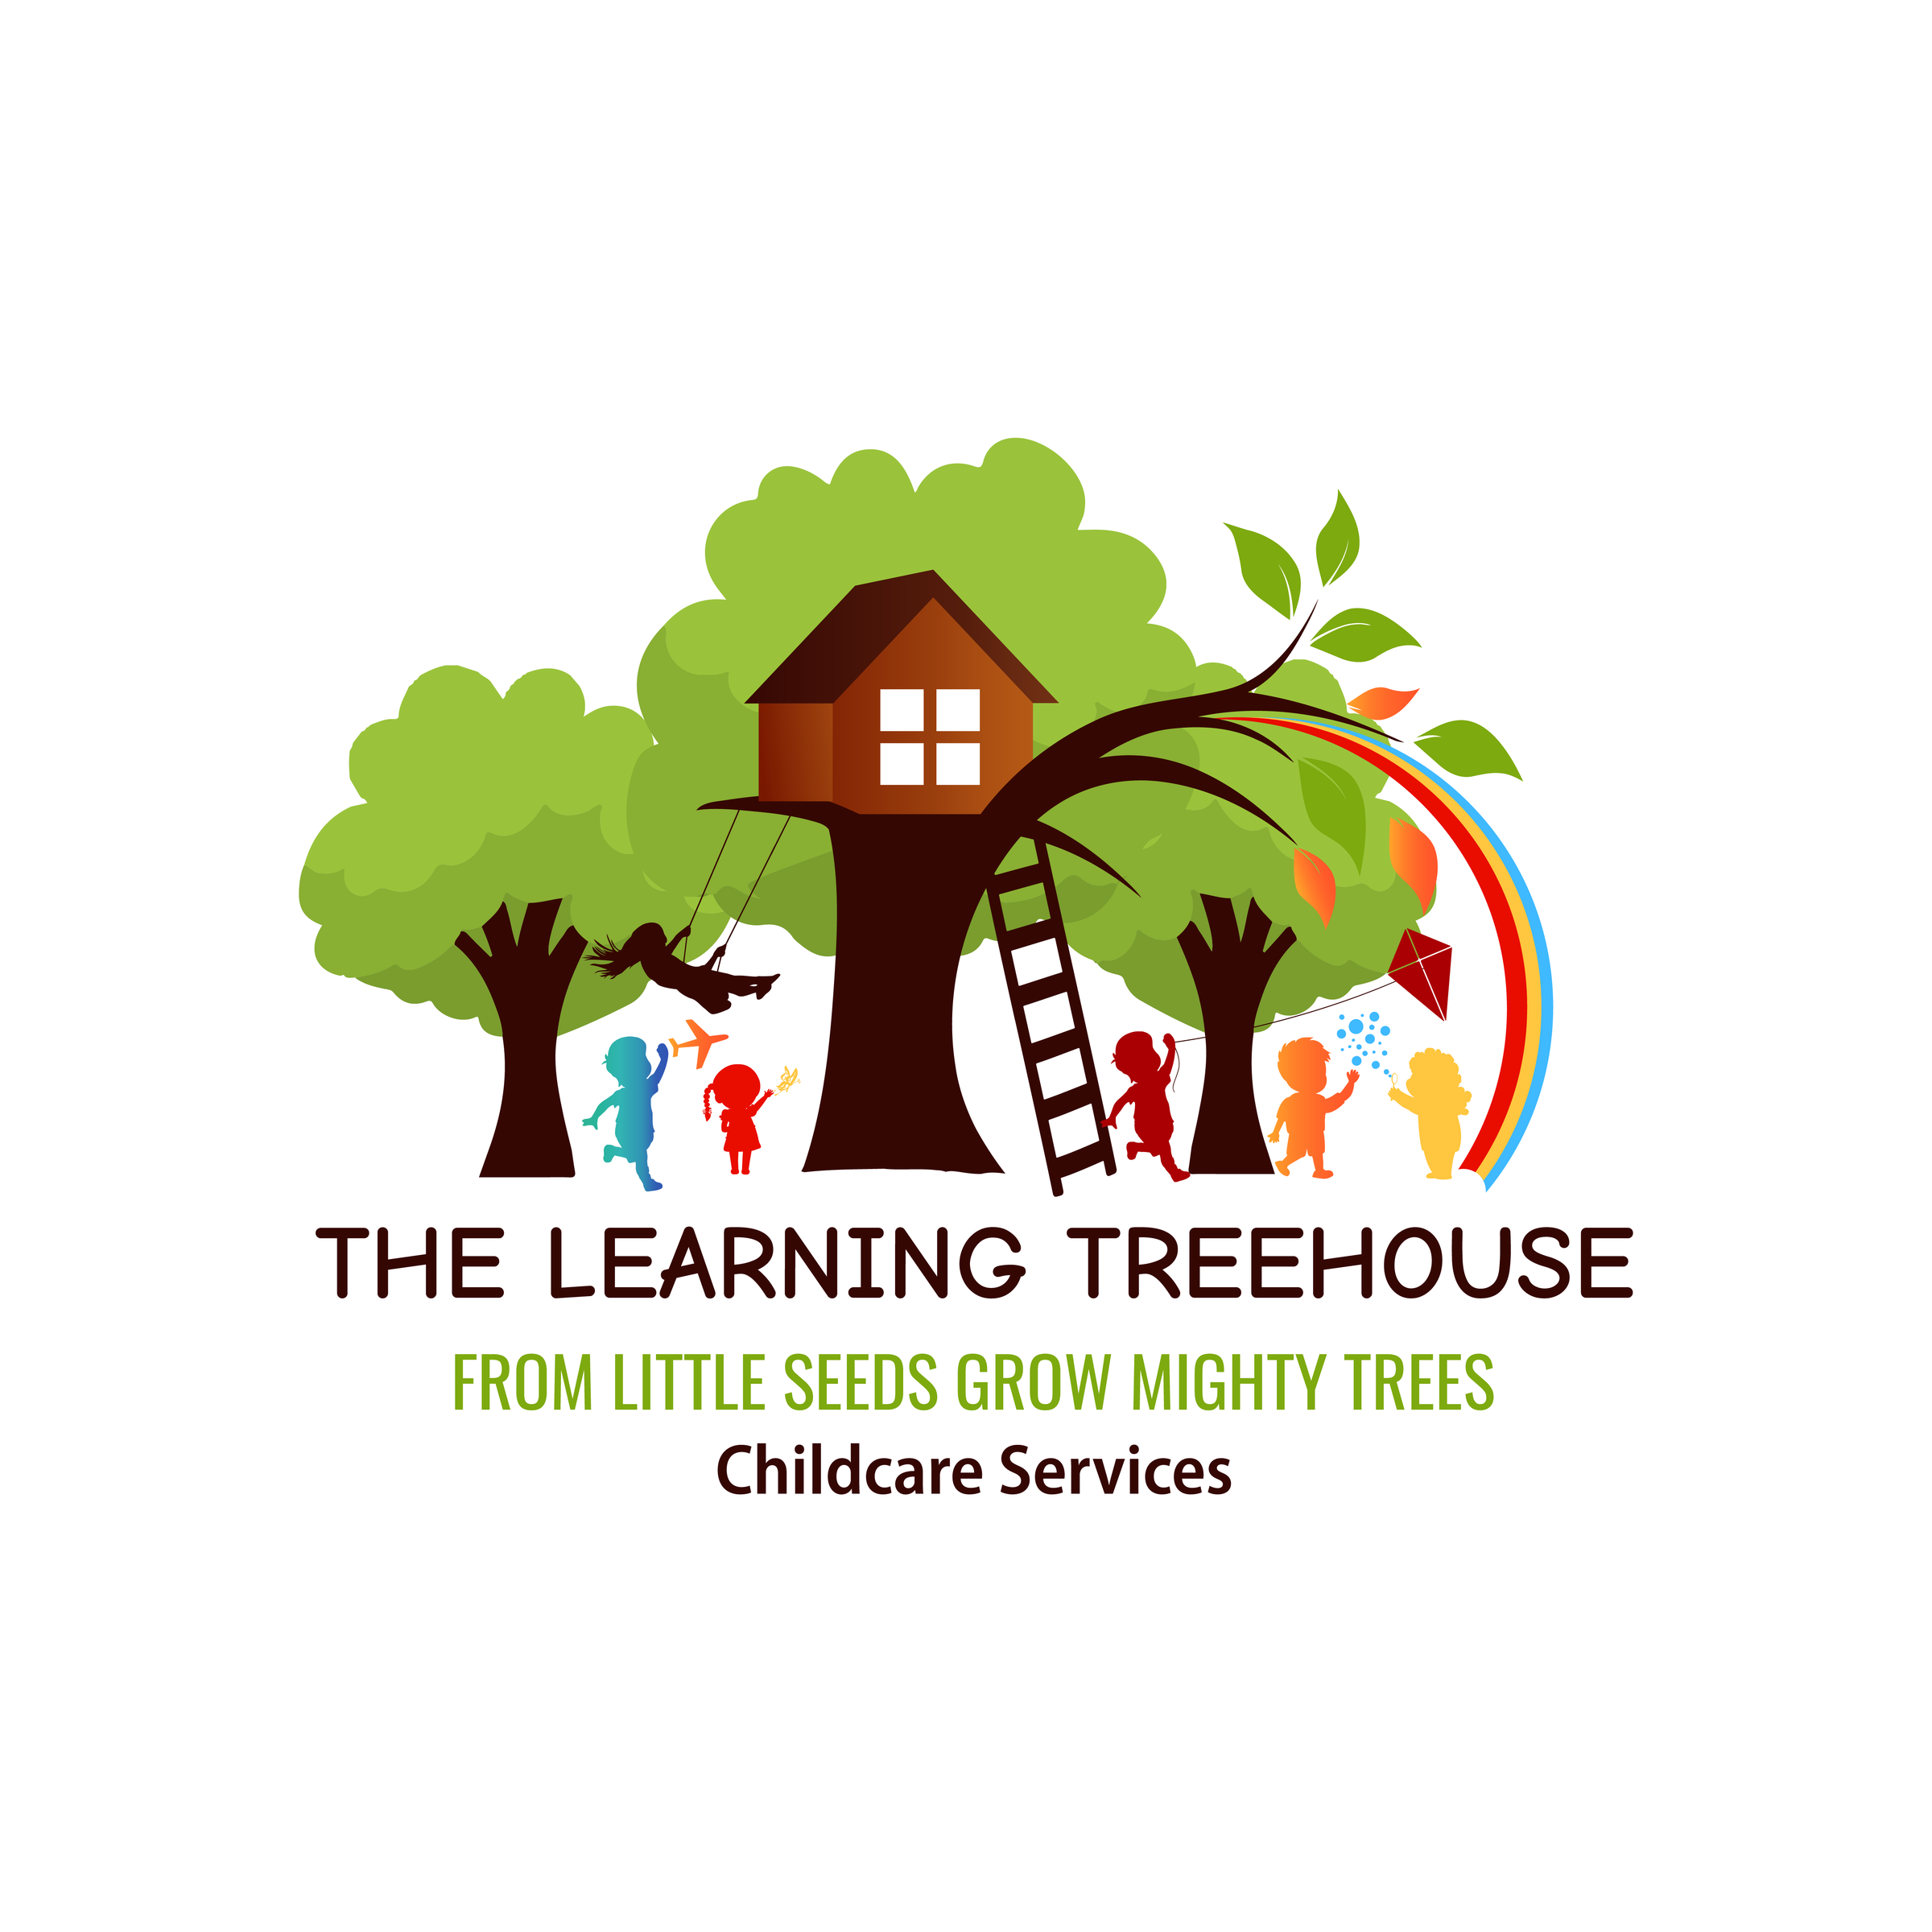 The Learning House